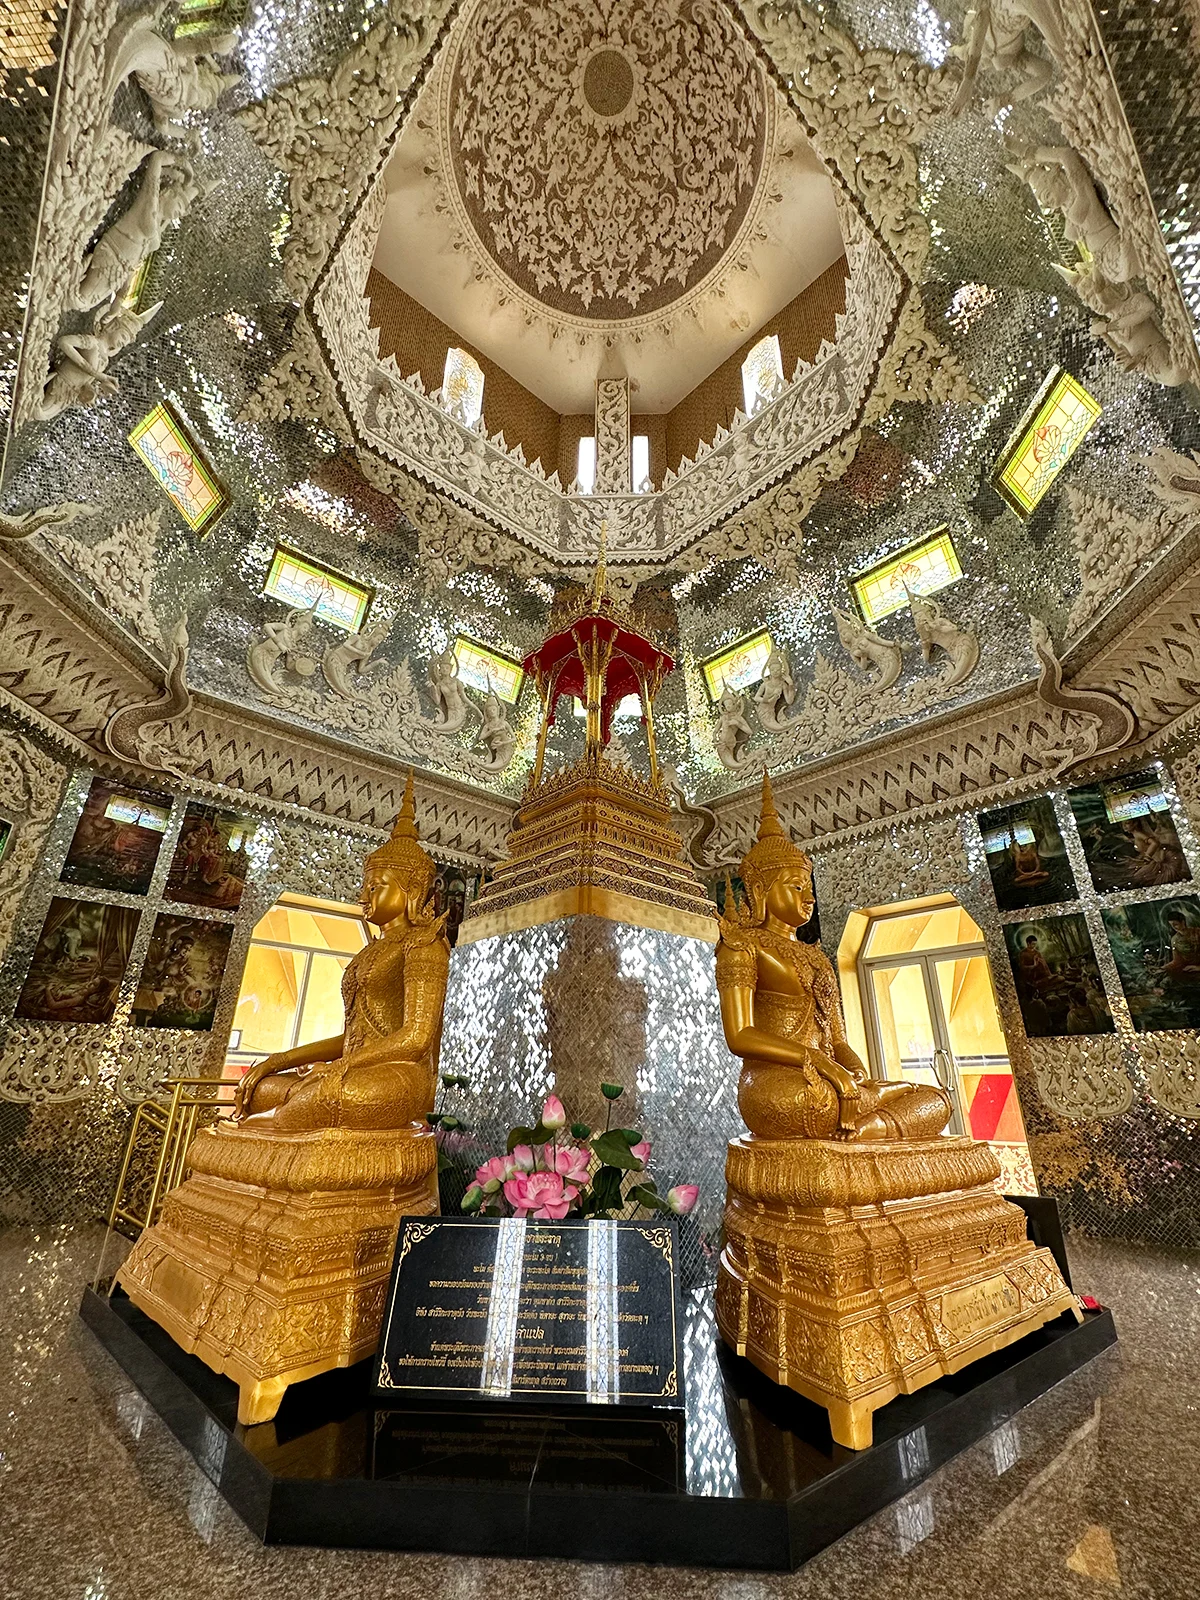 view of interior Buddhist temple with detailed tile work